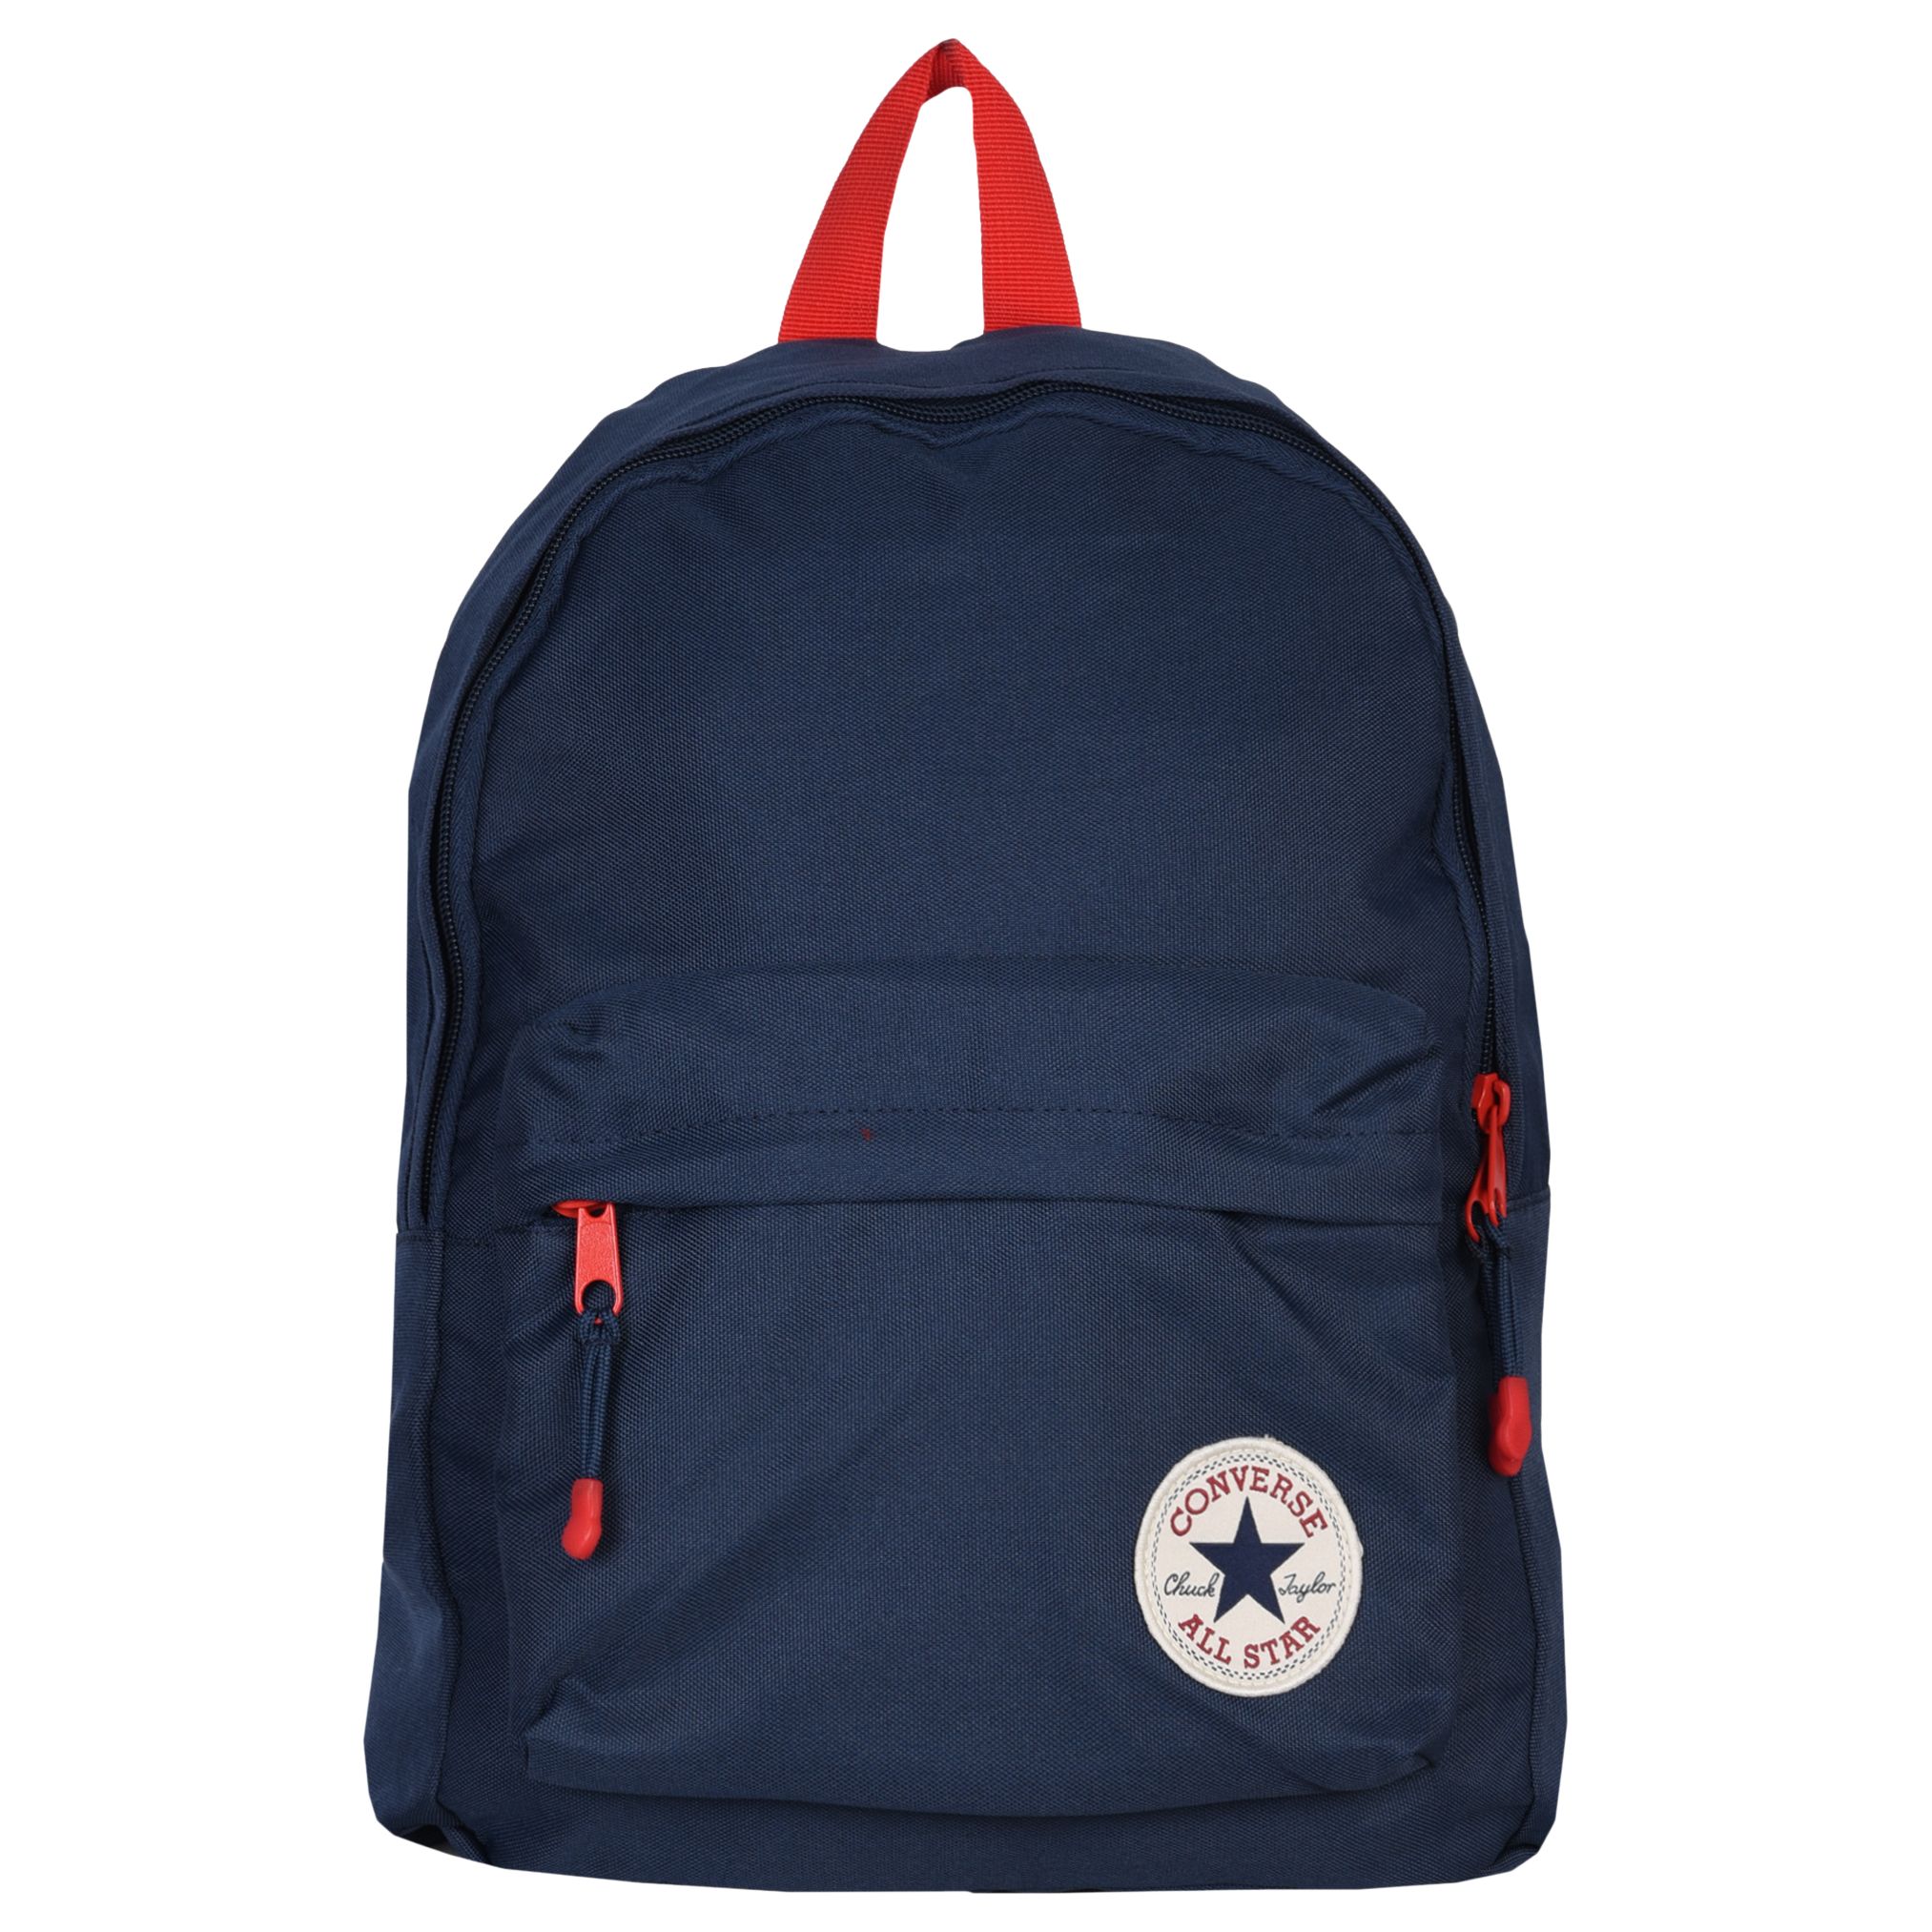 converse day backpack